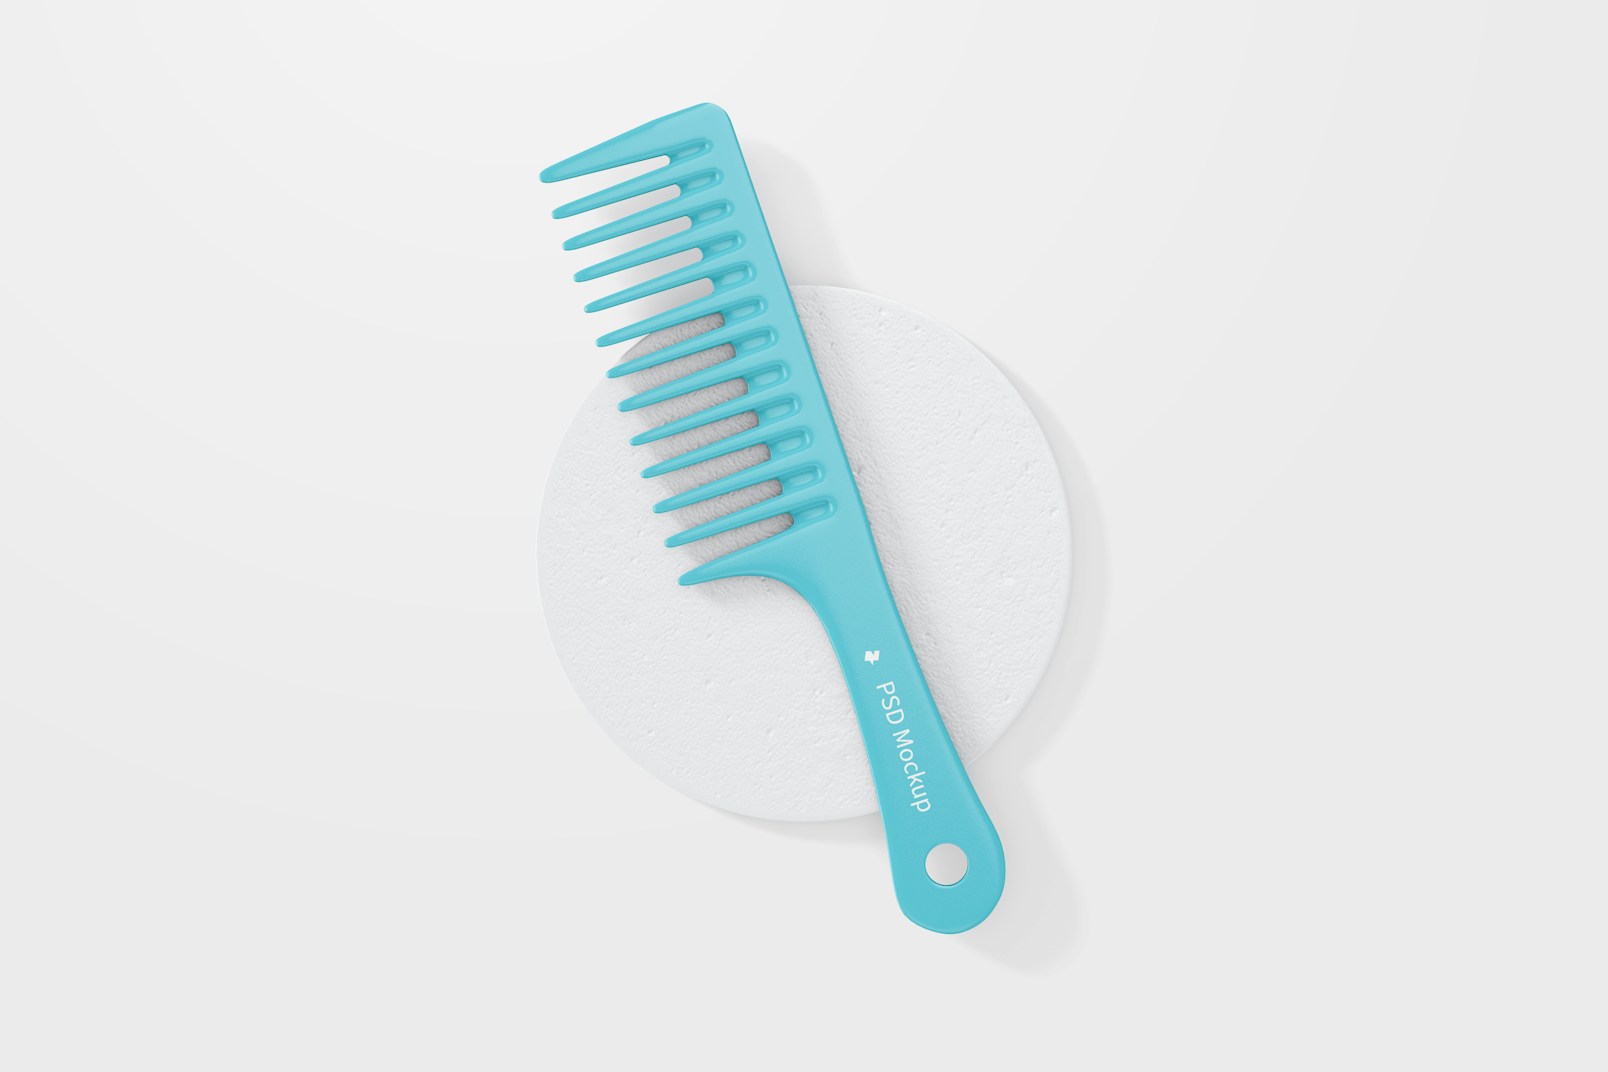 Wide Tooth Comb Mockup